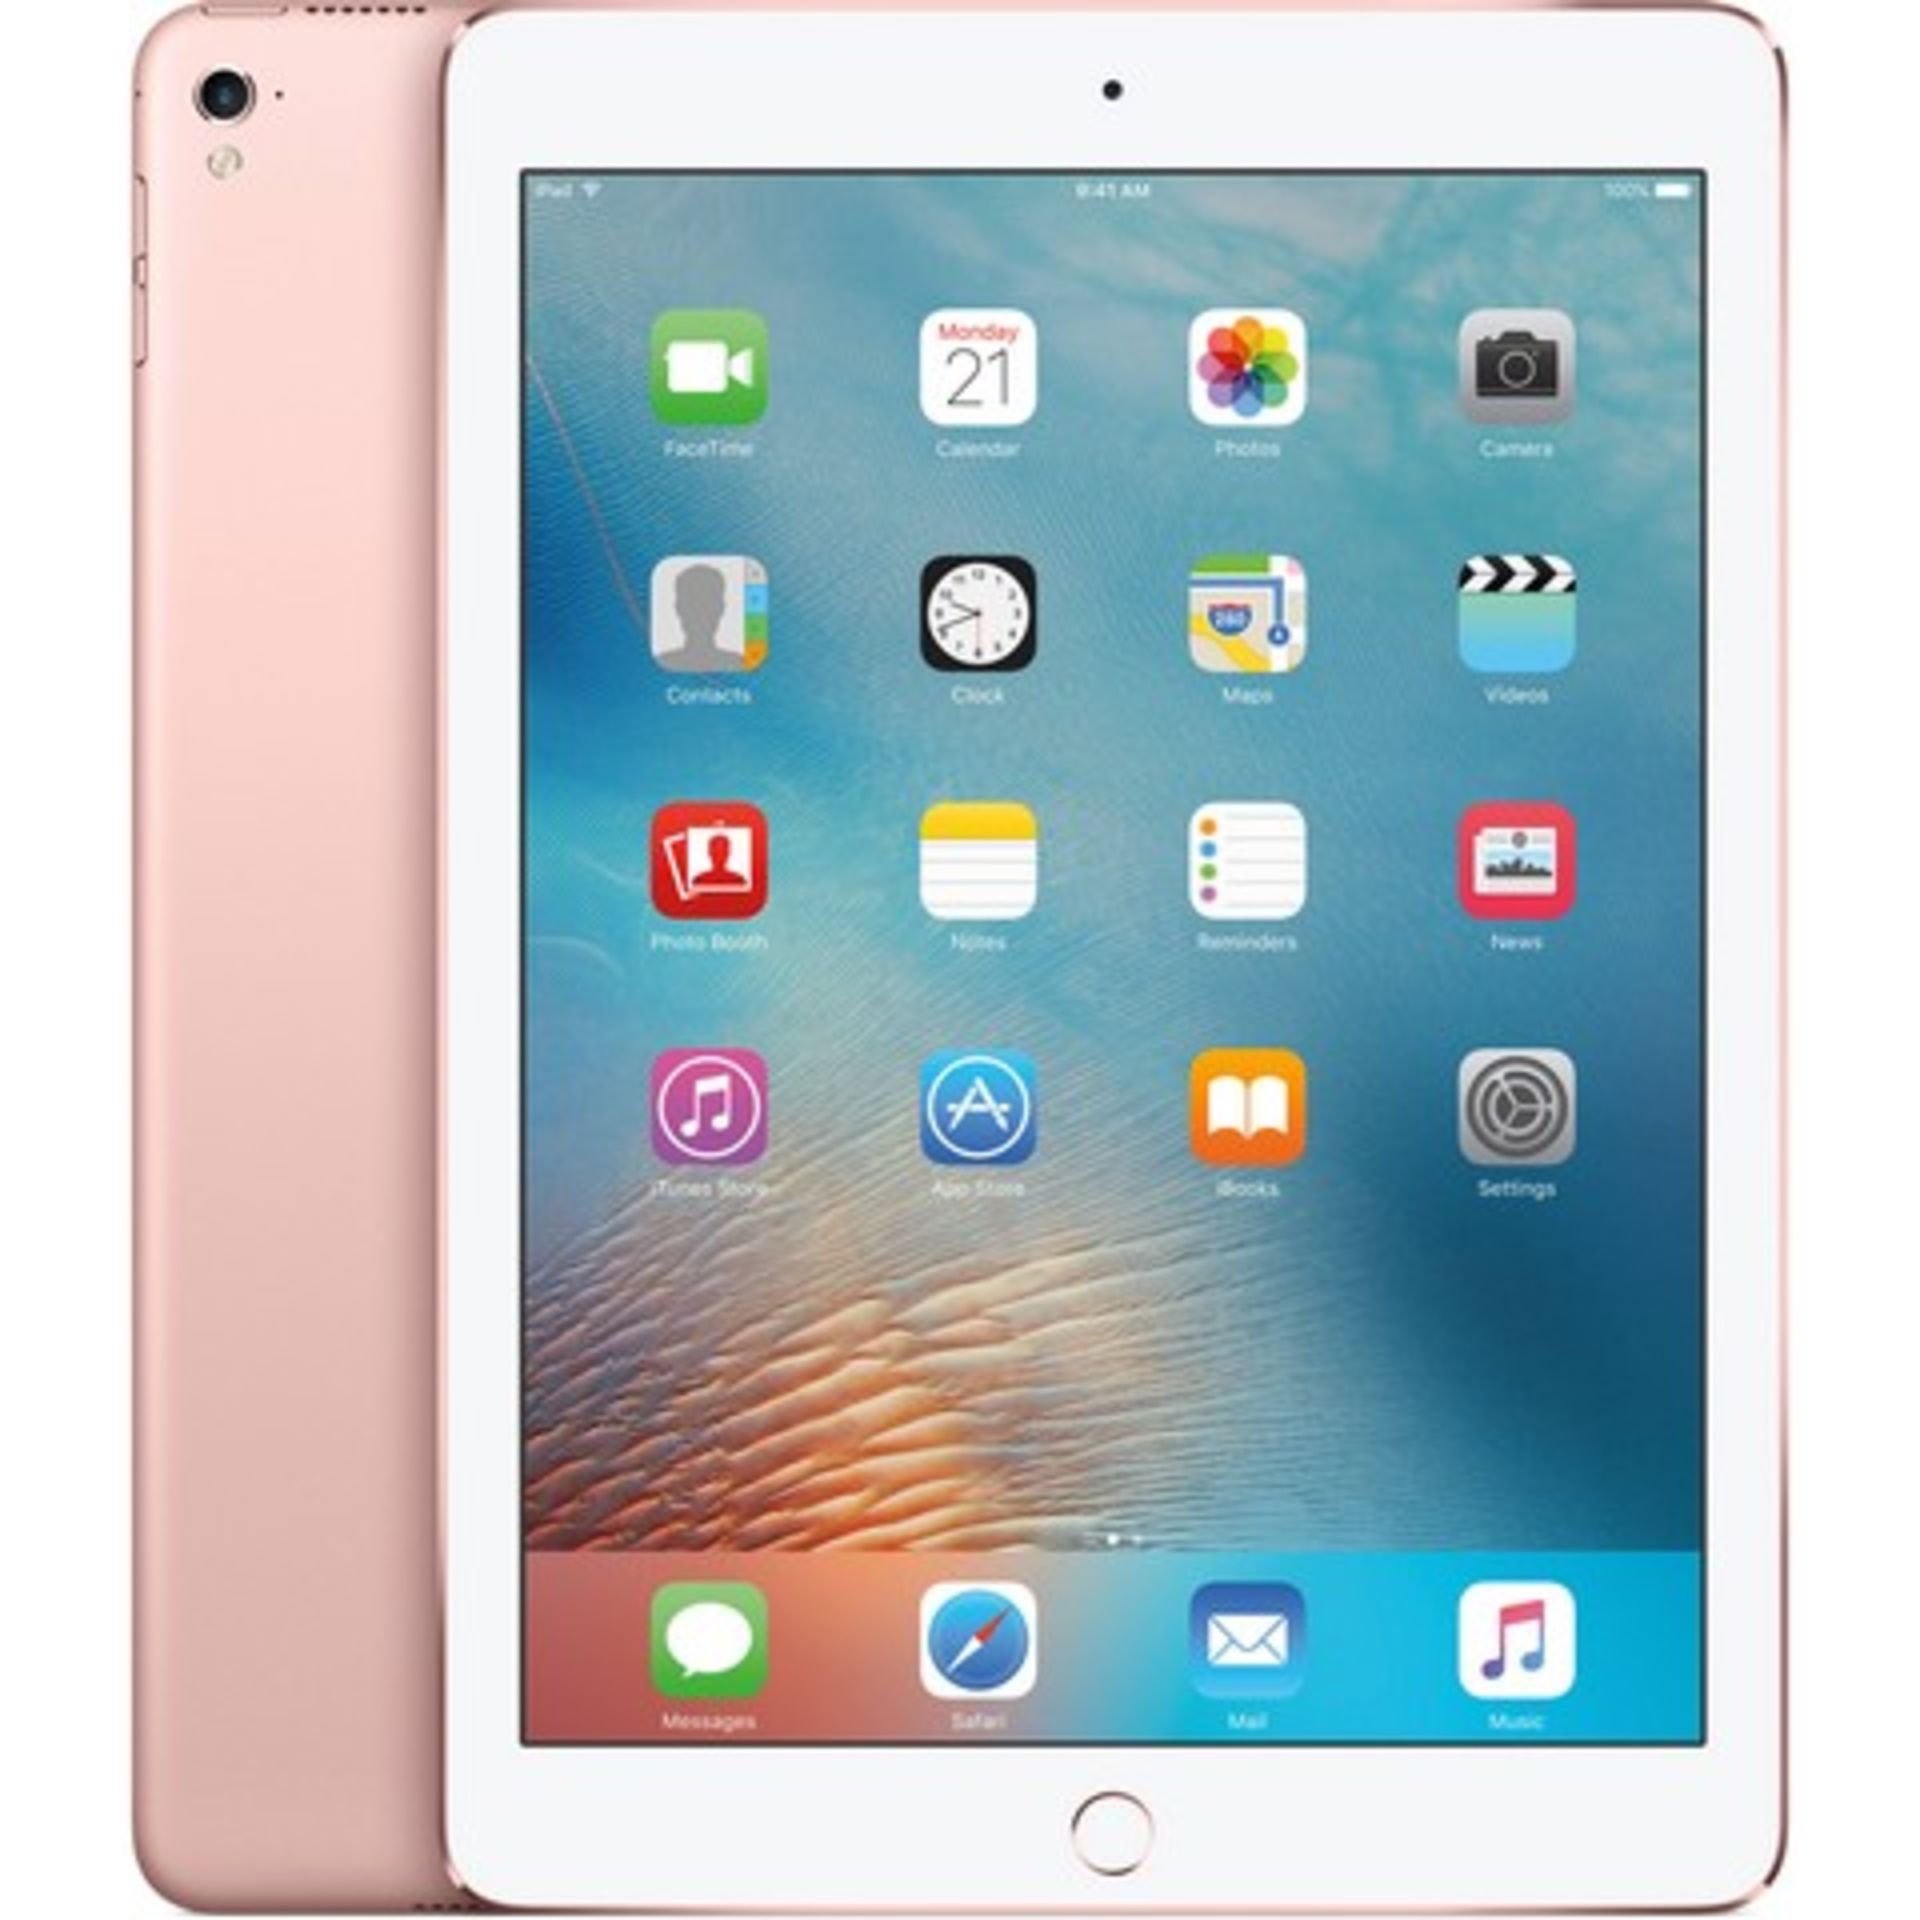 V Grade A Apple iPad Pro 9.7" 32GB Rose Gold - Wi-Fi Only - with Accessories - Very Minor Cosmetic